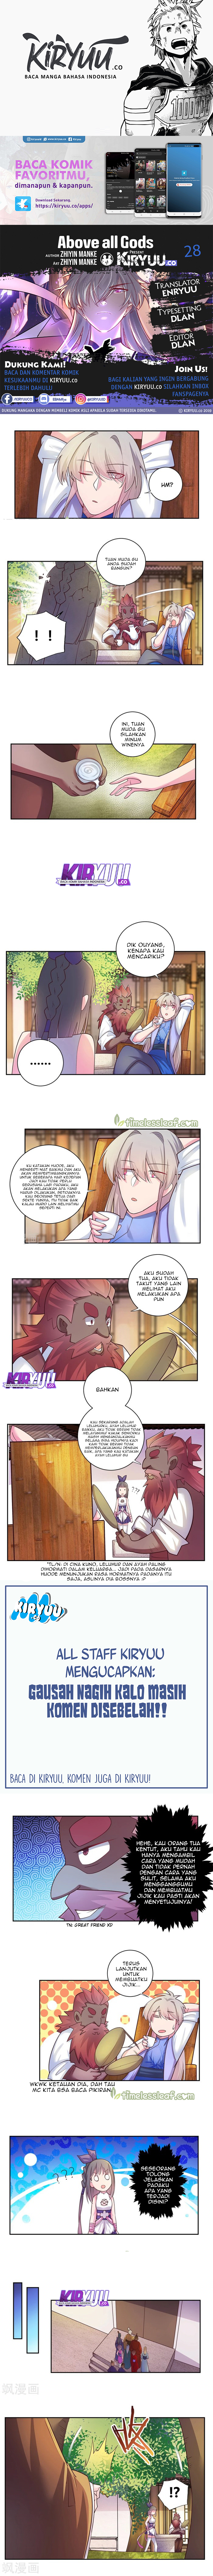 Above All Gods: Chapter 28 - Page 1